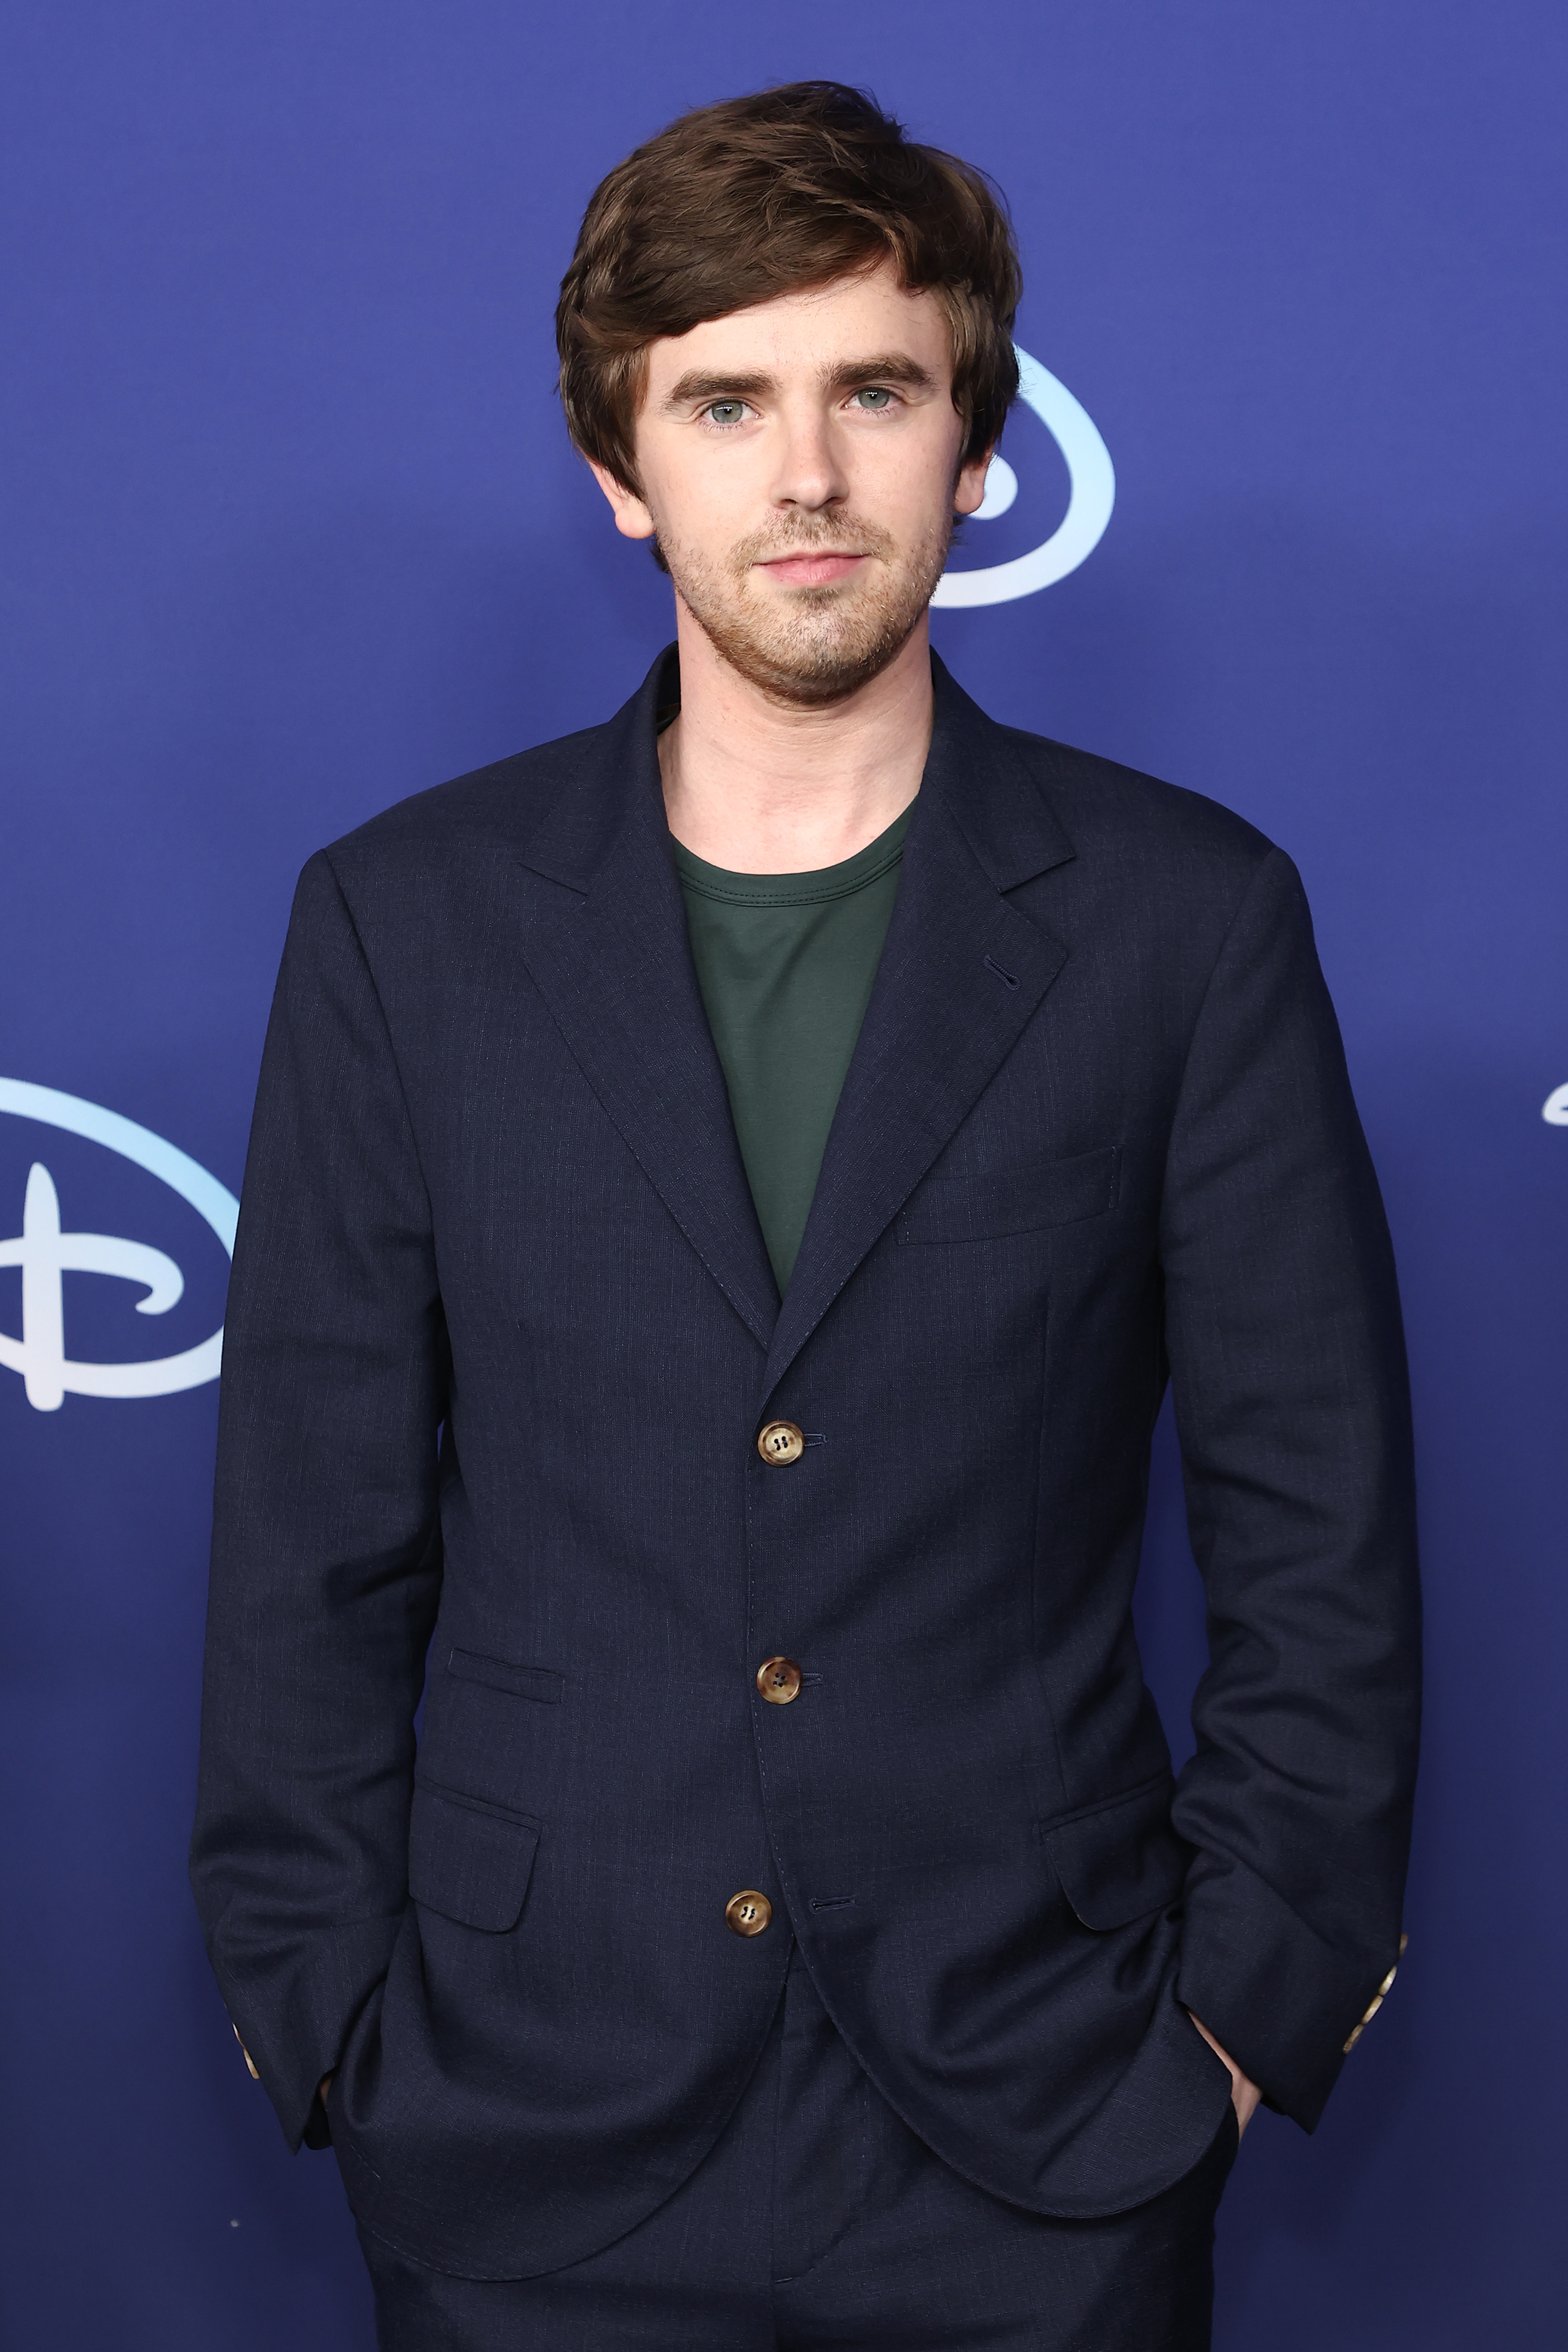 Freddie Highmore attends the ABC Disney Upfront at Basketball City - Pier 36 - South Street in New York City, on May 17, 2022. | Source: Getty Images